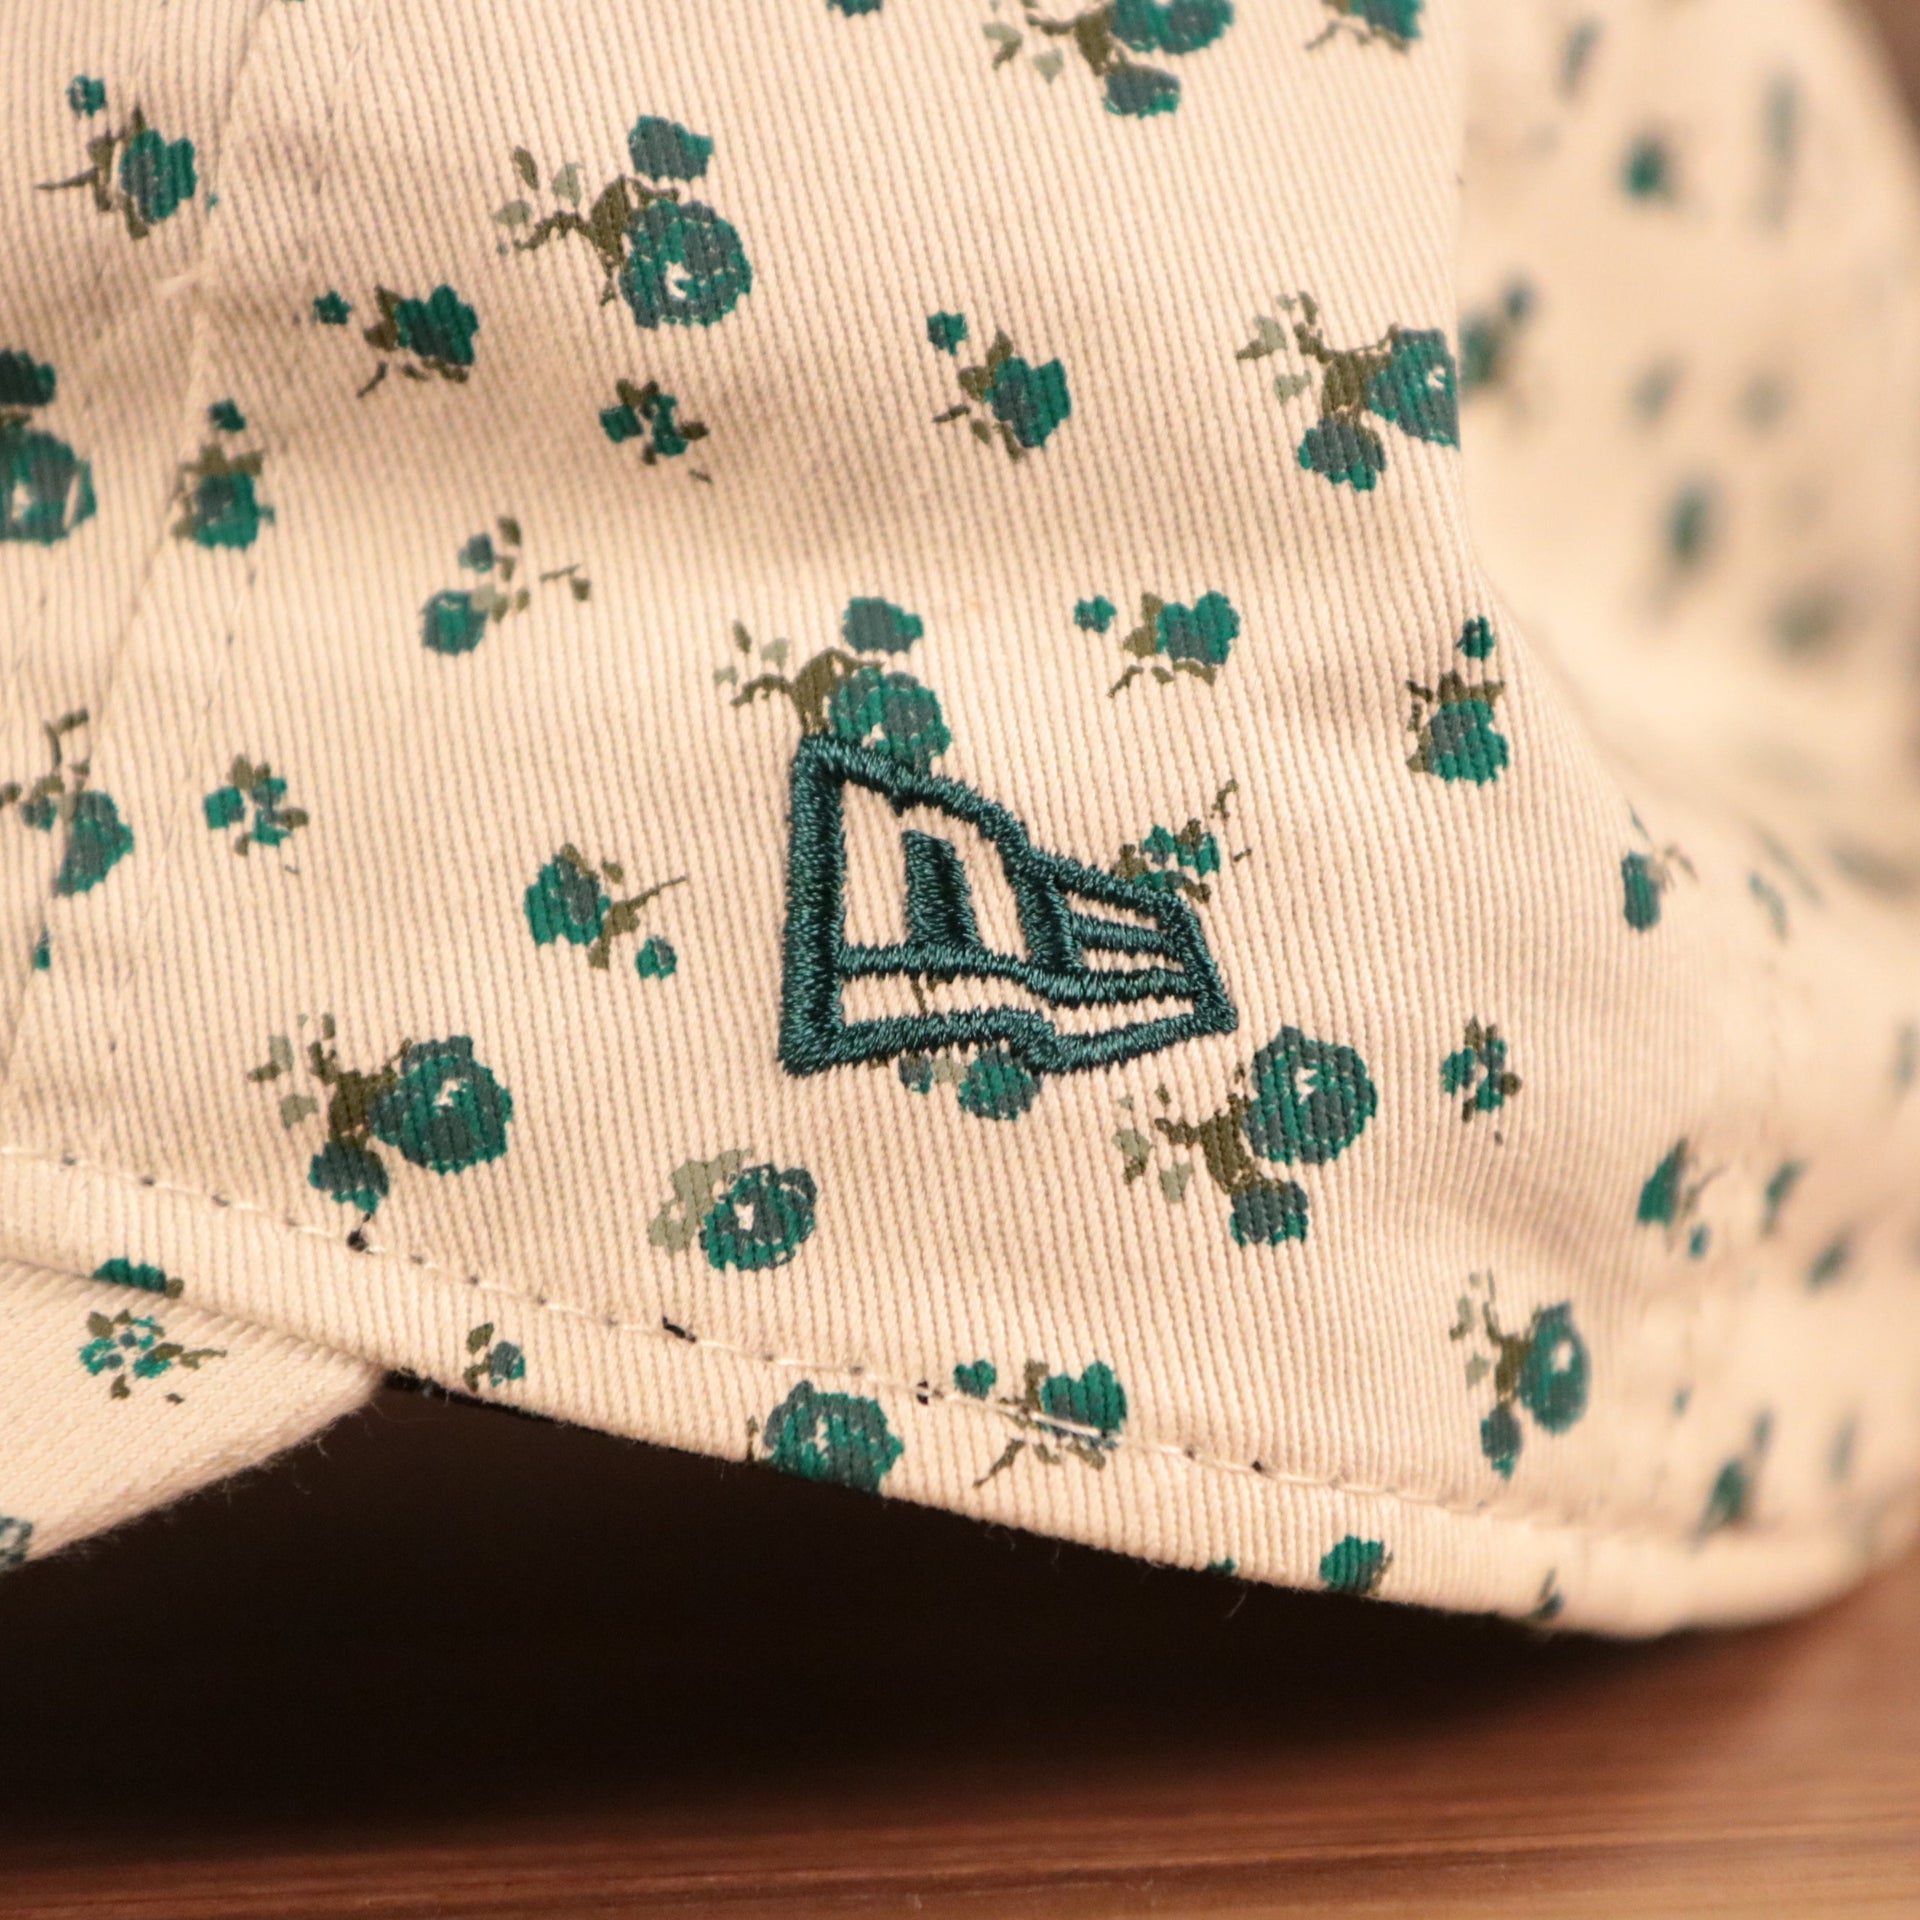 The New Era logo on the left side of the cream Philadelphia Eagles hat with flowers by New Era.